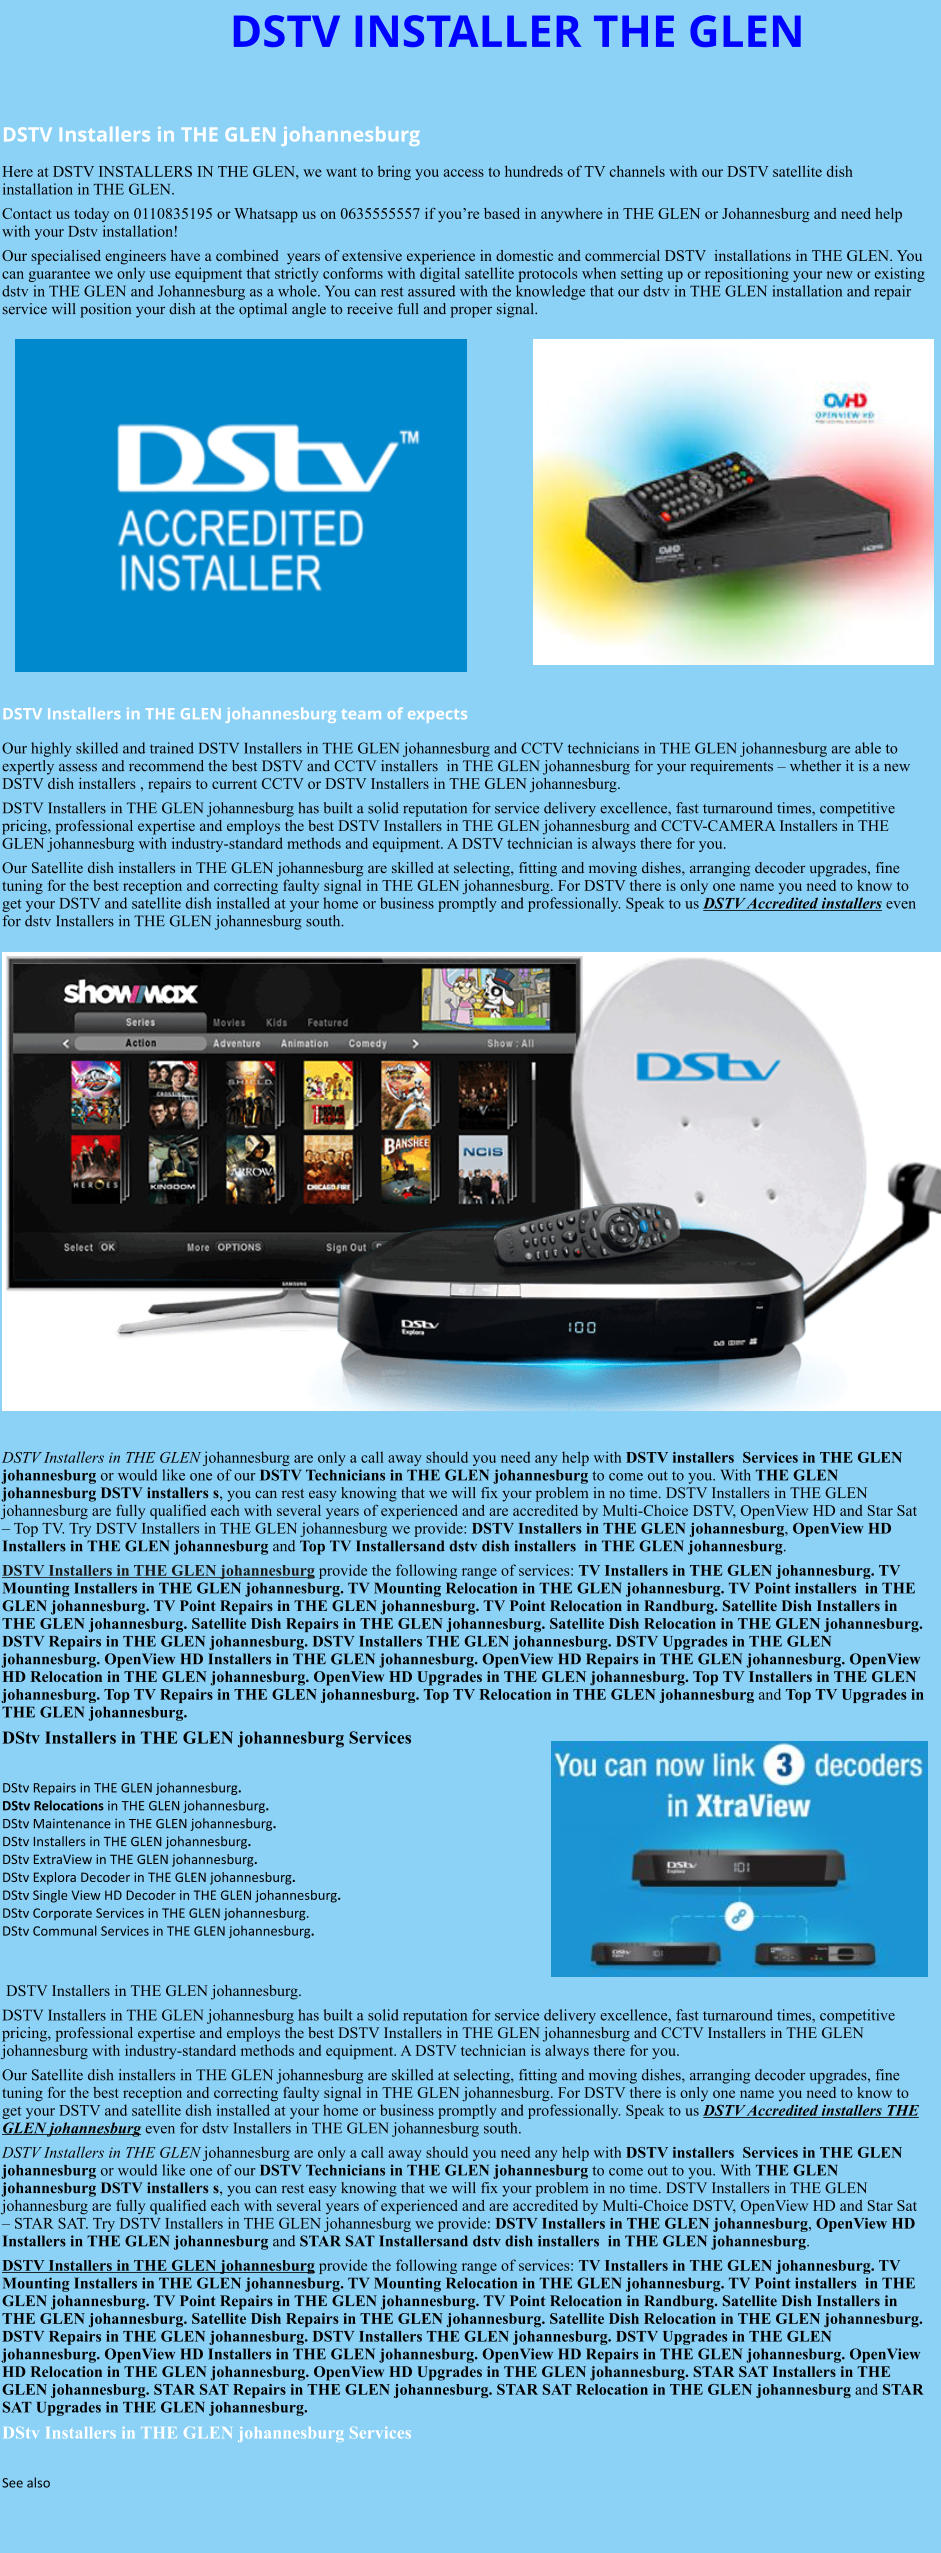 DSTV INSTALLER THE GLEN	  DSTV Installers in THE GLEN johannesburg  Here at DSTV INSTALLERS IN THE GLEN, we want to bring you access to hundreds of TV channels with our DSTV satellite dish installation in THE GLEN. Contact us today on 0110835195 or Whatsapp us on 0635555557 if you’re based in anywhere in THE GLEN or Johannesburg and need help with your Dstv installation! Our specialised engineers have a combined  years of extensive experience in domestic and commercial DSTV  installations in THE GLEN. You can guarantee we only use equipment that strictly conforms with digital satellite protocols when setting up or repositioning your new or existing dstv in THE GLEN and Johannesburg as a whole. You can rest assured with the knowledge that our dstv in THE GLEN installation and repair service will position your dish at the optimal angle to receive full and proper signal.                DSTV Installers in THE GLEN johannesburg team of expects Our highly skilled and trained DSTV Installers in THE GLEN johannesburg and CCTV technicians in THE GLEN johannesburg are able to expertly assess and recommend the best DSTV and CCTV installers  in THE GLEN johannesburg for your requirements – whether it is a new DSTV dish installers , repairs to current CCTV or DSTV Installers in THE GLEN johannesburg. DSTV Installers in THE GLEN johannesburg has built a solid reputation for service delivery excellence, fast turnaround times, competitive pricing, professional expertise and employs the best DSTV Installers in THE GLEN johannesburg and CCTV-CAMERA Installers in THE GLEN johannesburg with industry-standard methods and equipment. A DSTV technician is always there for you. Our Satellite dish installers in THE GLEN johannesburg are skilled at selecting, fitting and moving dishes, arranging decoder upgrades, fine tuning for the best reception and correcting faulty signal in THE GLEN johannesburg. For DSTV there is only one name you need to know to get your DSTV and satellite dish installed at your home or business promptly and professionally. Speak to us DSTV Accredited installers even for dstv Installers in THE GLEN johannesburg south.                      DSTV Installers in THE GLEN johannesburg are only a call away should you need any help with DSTV installers  Services in THE GLEN johannesburg or would like one of our DSTV Technicians in THE GLEN johannesburg to come out to you. With THE GLEN johannesburg DSTV installers s, you can rest easy knowing that we will fix your problem in no time. DSTV Installers in THE GLEN johannesburg are fully qualified each with several years of experienced and are accredited by Multi-Choice DSTV, OpenView HD and Star Sat – Top TV. Try DSTV Installers in THE GLEN johannesburg we provide: DSTV Installers in THE GLEN johannesburg, OpenView HD Installers in THE GLEN johannesburg and Top TV Installersand dstv dish installers  in THE GLEN johannesburg. DSTV Installers in THE GLEN johannesburg provide the following range of services: TV Installers in THE GLEN johannesburg. TV Mounting Installers in THE GLEN johannesburg. TV Mounting Relocation in THE GLEN johannesburg. TV Point installers  in THE GLEN johannesburg. TV Point Repairs in THE GLEN johannesburg. TV Point Relocation in Randburg. Satellite Dish Installers in THE GLEN johannesburg. Satellite Dish Repairs in THE GLEN johannesburg. Satellite Dish Relocation in THE GLEN johannesburg. DSTV Repairs in THE GLEN johannesburg. DSTV Installers THE GLEN johannesburg. DSTV Upgrades in THE GLEN johannesburg. OpenView HD Installers in THE GLEN johannesburg. OpenView HD Repairs in THE GLEN johannesburg. OpenView HD Relocation in THE GLEN johannesburg. OpenView HD Upgrades in THE GLEN johannesburg. Top TV Installers in THE GLEN johannesburg. Top TV Repairs in THE GLEN johannesburg. Top TV Relocation in THE GLEN johannesburg and Top TV Upgrades in THE GLEN johannesburg. DStv Installers in THE GLEN johannesburg Services  DStv Repairs in THE GLEN johannesburg.  DStv Relocations in THE GLEN johannesburg.  DStv Maintenance in THE GLEN johannesburg. DStv Installers in THE GLEN johannesburg. DStv ExtraView in THE GLEN johannesburg. DStv Explora Decoder in THE GLEN johannesburg. DStv Single View HD Decoder in THE GLEN johannesburg. DStv Corporate Services in THE GLEN johannesburg. DStv Communal Services in THE GLEN johannesburg.    DSTV Installers in THE GLEN johannesburg. DSTV Installers in THE GLEN johannesburg has built a solid reputation for service delivery excellence, fast turnaround times, competitive pricing, professional expertise and employs the best DSTV Installers in THE GLEN johannesburg and CCTV Installers in THE GLEN johannesburg with industry-standard methods and equipment. A DSTV technician is always there for you. Our Satellite dish installers in THE GLEN johannesburg are skilled at selecting, fitting and moving dishes, arranging decoder upgrades, fine tuning for the best reception and correcting faulty signal in THE GLEN johannesburg. For DSTV there is only one name you need to know to get your DSTV and satellite dish installed at your home or business promptly and professionally. Speak to us DSTV Accredited installers THE GLEN johannesburg even for dstv Installers in THE GLEN johannesburg south. DSTV Installers in THE GLEN johannesburg are only a call away should you need any help with DSTV installers  Services in THE GLEN johannesburg or would like one of our DSTV Technicians in THE GLEN johannesburg to come out to you. With THE GLEN johannesburg DSTV installers s, you can rest easy knowing that we will fix your problem in no time. DSTV Installers in THE GLEN johannesburg are fully qualified each with several years of experienced and are accredited by Multi-Choice DSTV, OpenView HD and Star Sat – STAR SAT. Try DSTV Installers in THE GLEN johannesburg we provide: DSTV Installers in THE GLEN johannesburg, OpenView HD Installers in THE GLEN johannesburg and STAR SAT Installersand dstv dish installers  in THE GLEN johannesburg. DSTV Installers in THE GLEN johannesburg provide the following range of services: TV Installers in THE GLEN johannesburg. TV Mounting Installers in THE GLEN johannesburg. TV Mounting Relocation in THE GLEN johannesburg. TV Point installers  in THE GLEN johannesburg. TV Point Repairs in THE GLEN johannesburg. TV Point Relocation in Randburg. Satellite Dish Installers in THE GLEN johannesburg. Satellite Dish Repairs in THE GLEN johannesburg. Satellite Dish Relocation in THE GLEN johannesburg. DSTV Repairs in THE GLEN johannesburg. DSTV Installers THE GLEN johannesburg. DSTV Upgrades in THE GLEN johannesburg. OpenView HD Installers in THE GLEN johannesburg. OpenView HD Repairs in THE GLEN johannesburg. OpenView HD Relocation in THE GLEN johannesburg. OpenView HD Upgrades in THE GLEN johannesburg. STAR SAT Installers in THE GLEN johannesburg. STAR SAT Repairs in THE GLEN johannesburg. STAR SAT Relocation in THE GLEN johannesburg and STAR SAT Upgrades in THE GLEN johannesburg. DStv Installers in THE GLEN johannesburg Services  See also